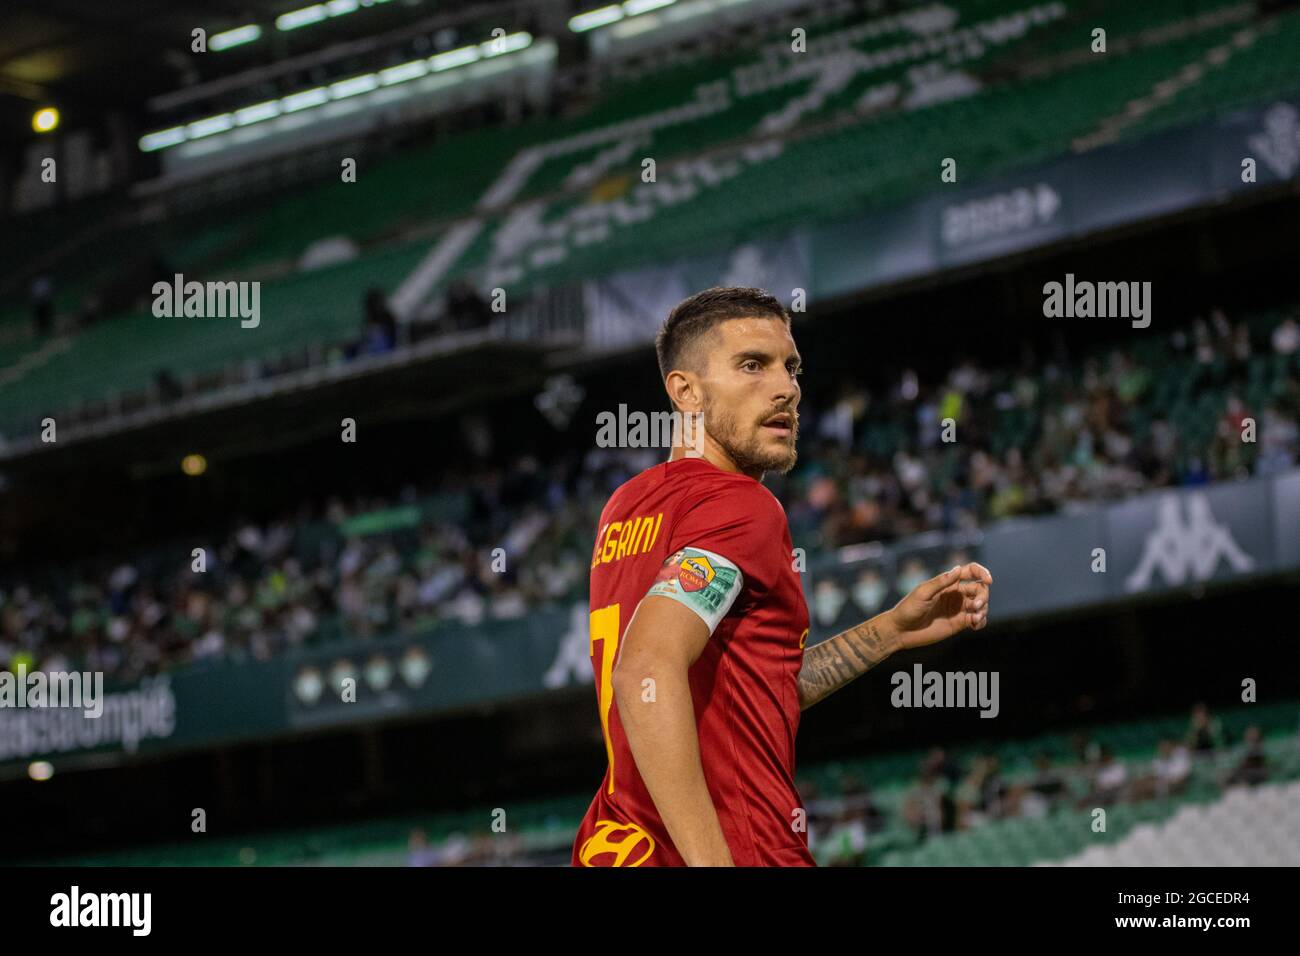 SEVILLE, SPAIN - 07 AUGUST 2021: Lorenzo Pellegrini of AS Roma during the friendly match between Real Betis Balompi and AS Roma. Credits: Mario D’az Rasero / Medialys Images/Sipa USA Stock Photo